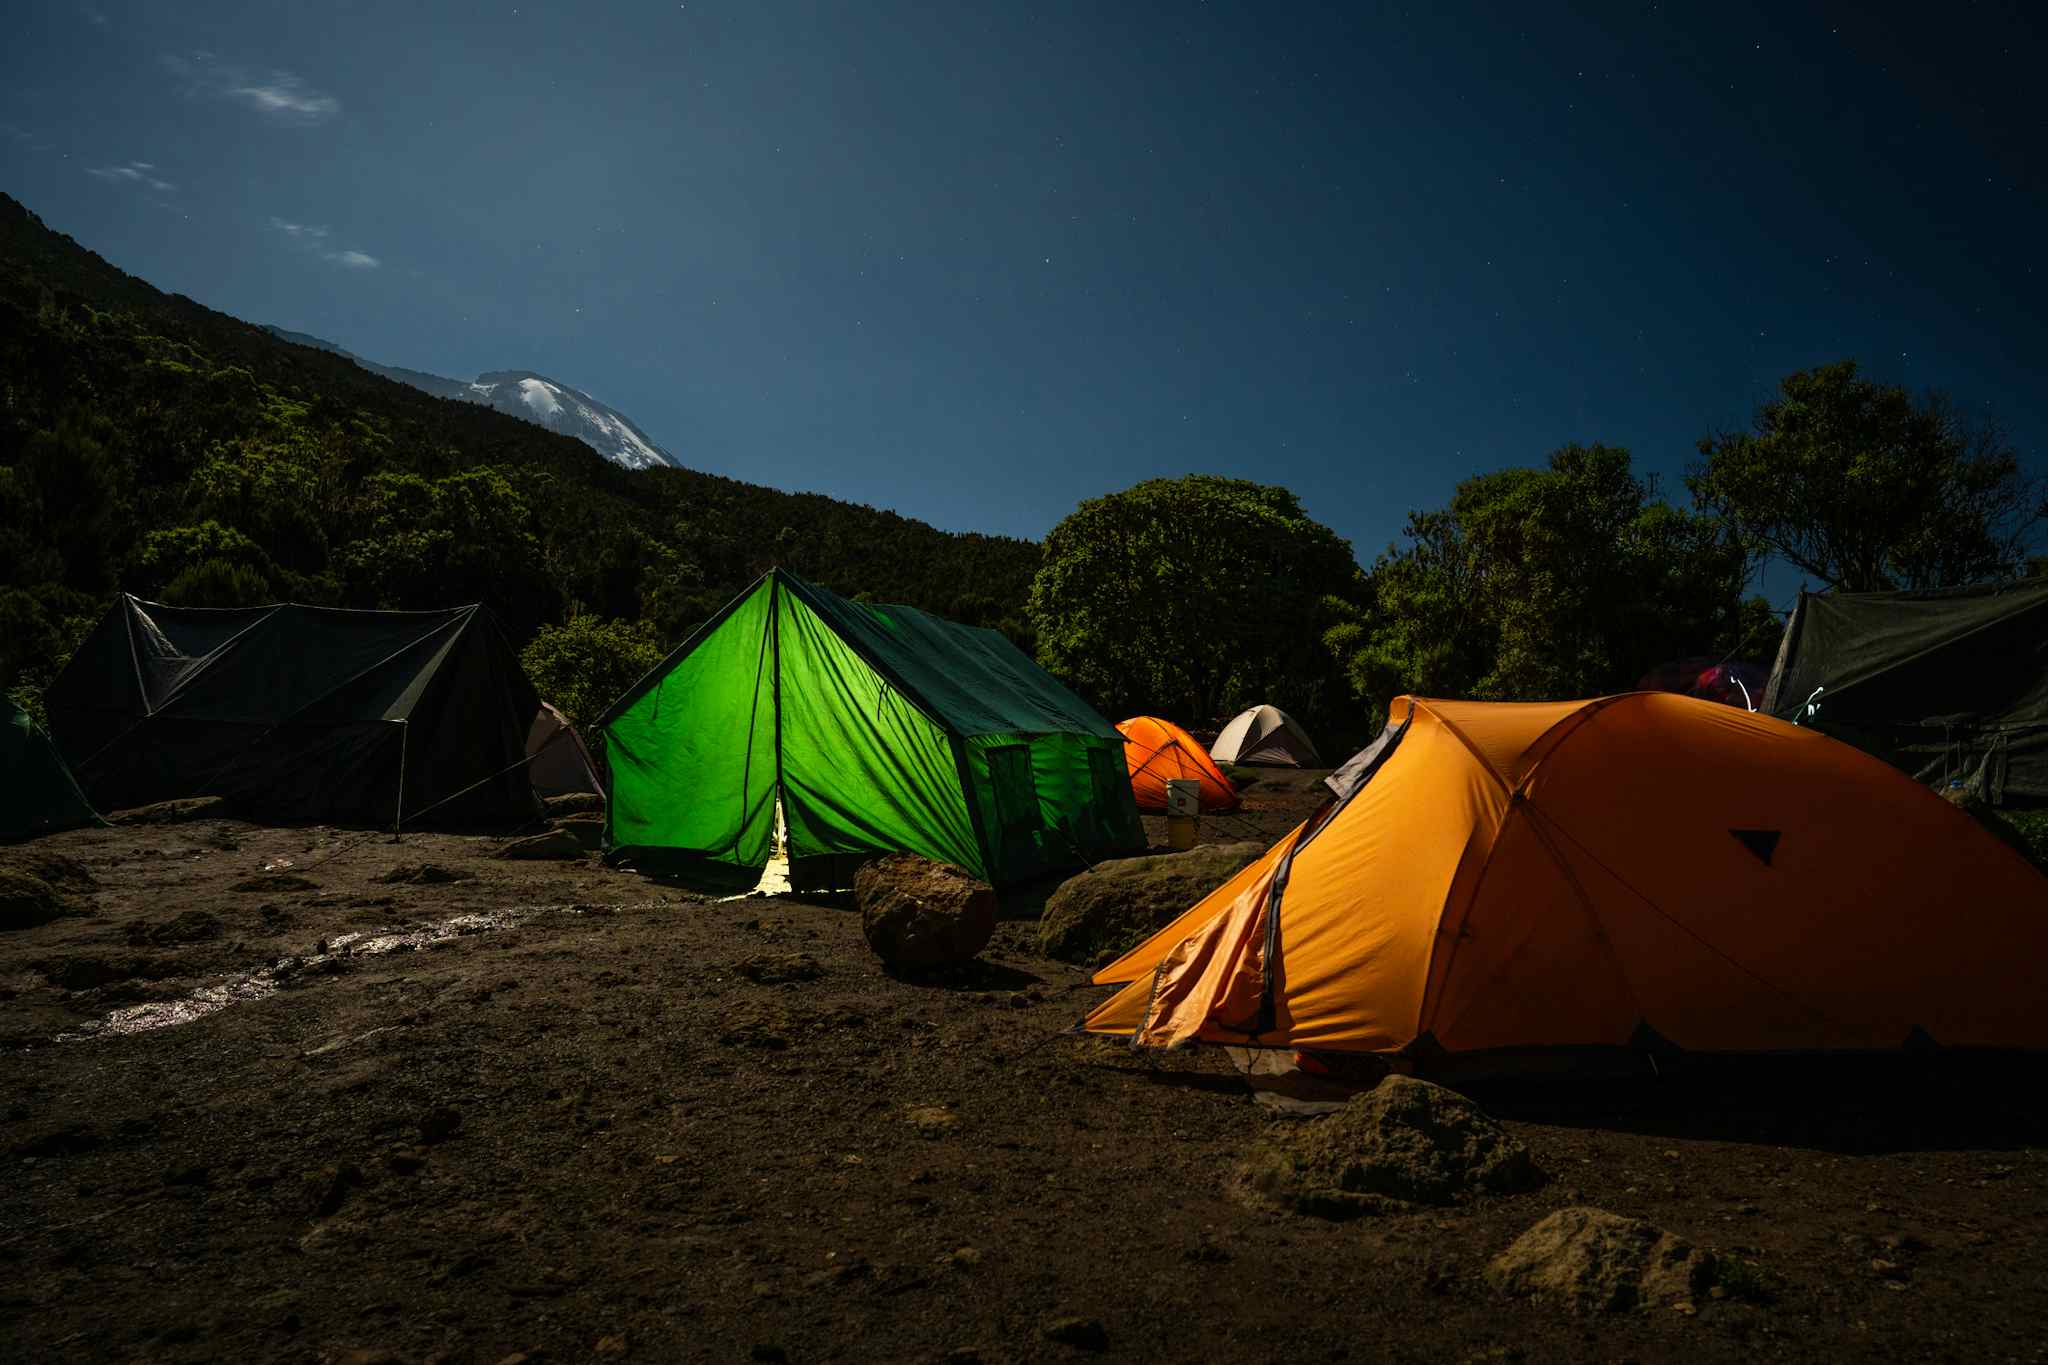 Illuminated tents at night in Machame Camp in front of Mount Kilimanjaro, Tanzania, under the stars.